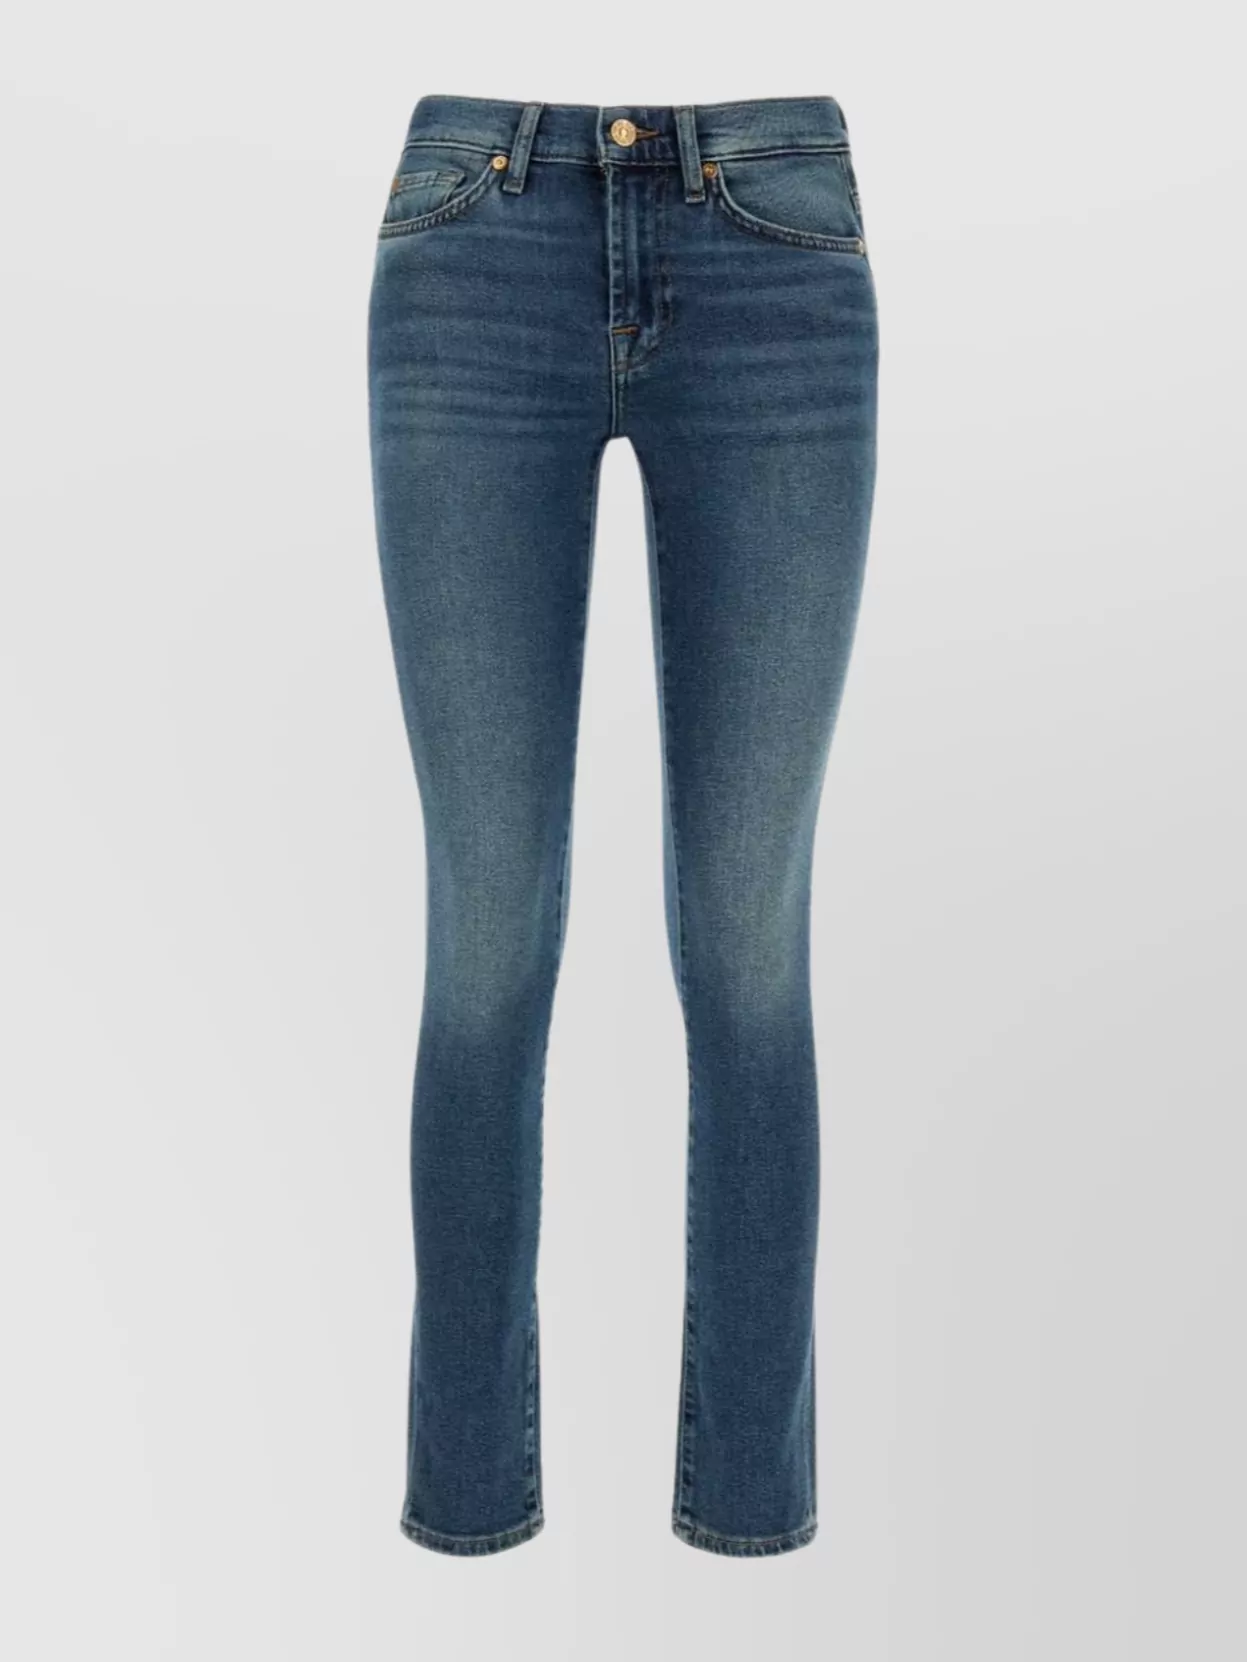 Shop 7 For All Mankind Roxanne Stretch Denim Jeans